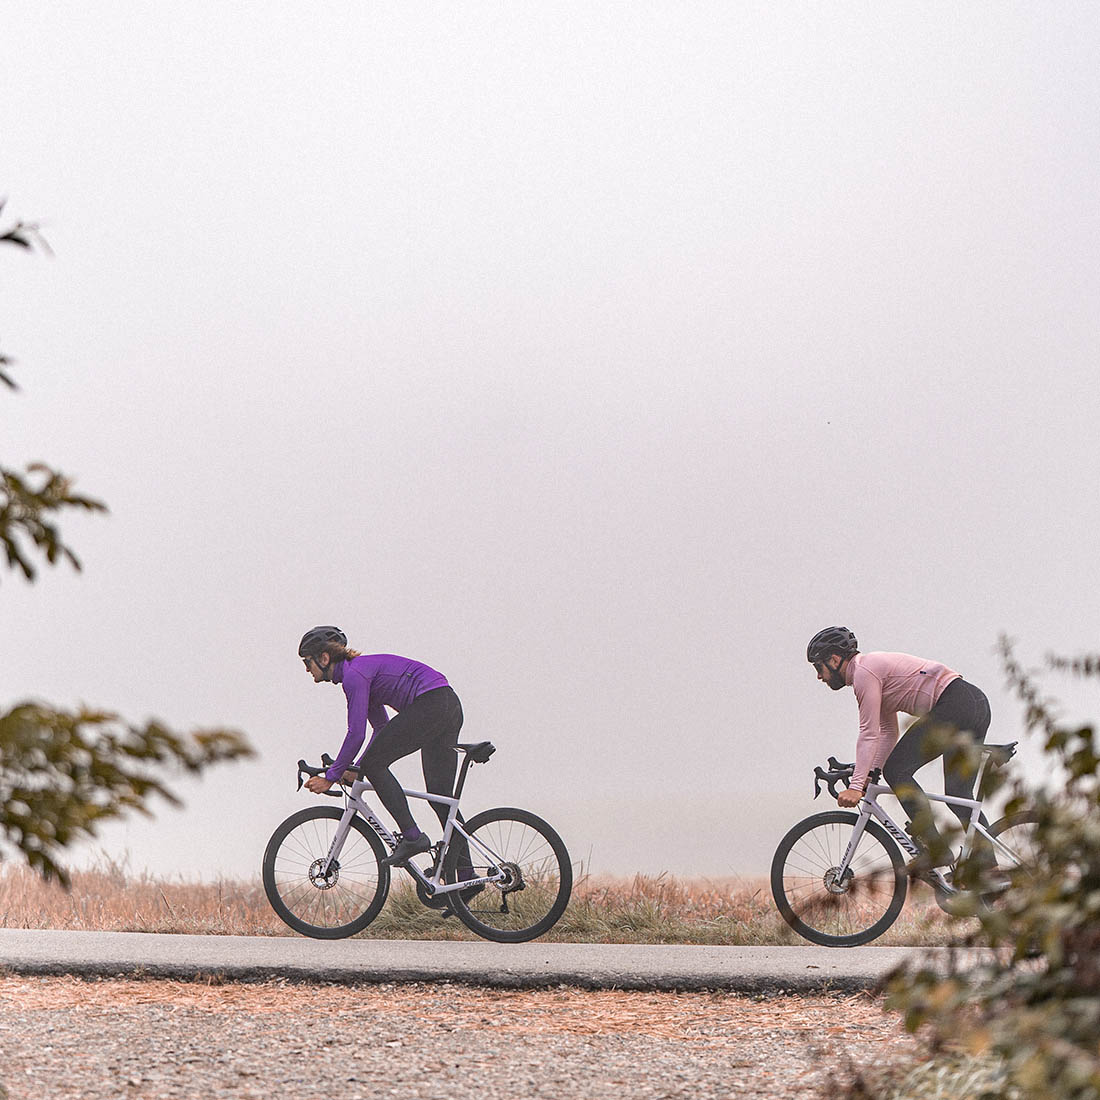 Two cyclists on road bikes ride in cool autumn weather dressed in warm autumn clothing by the Luxa brand